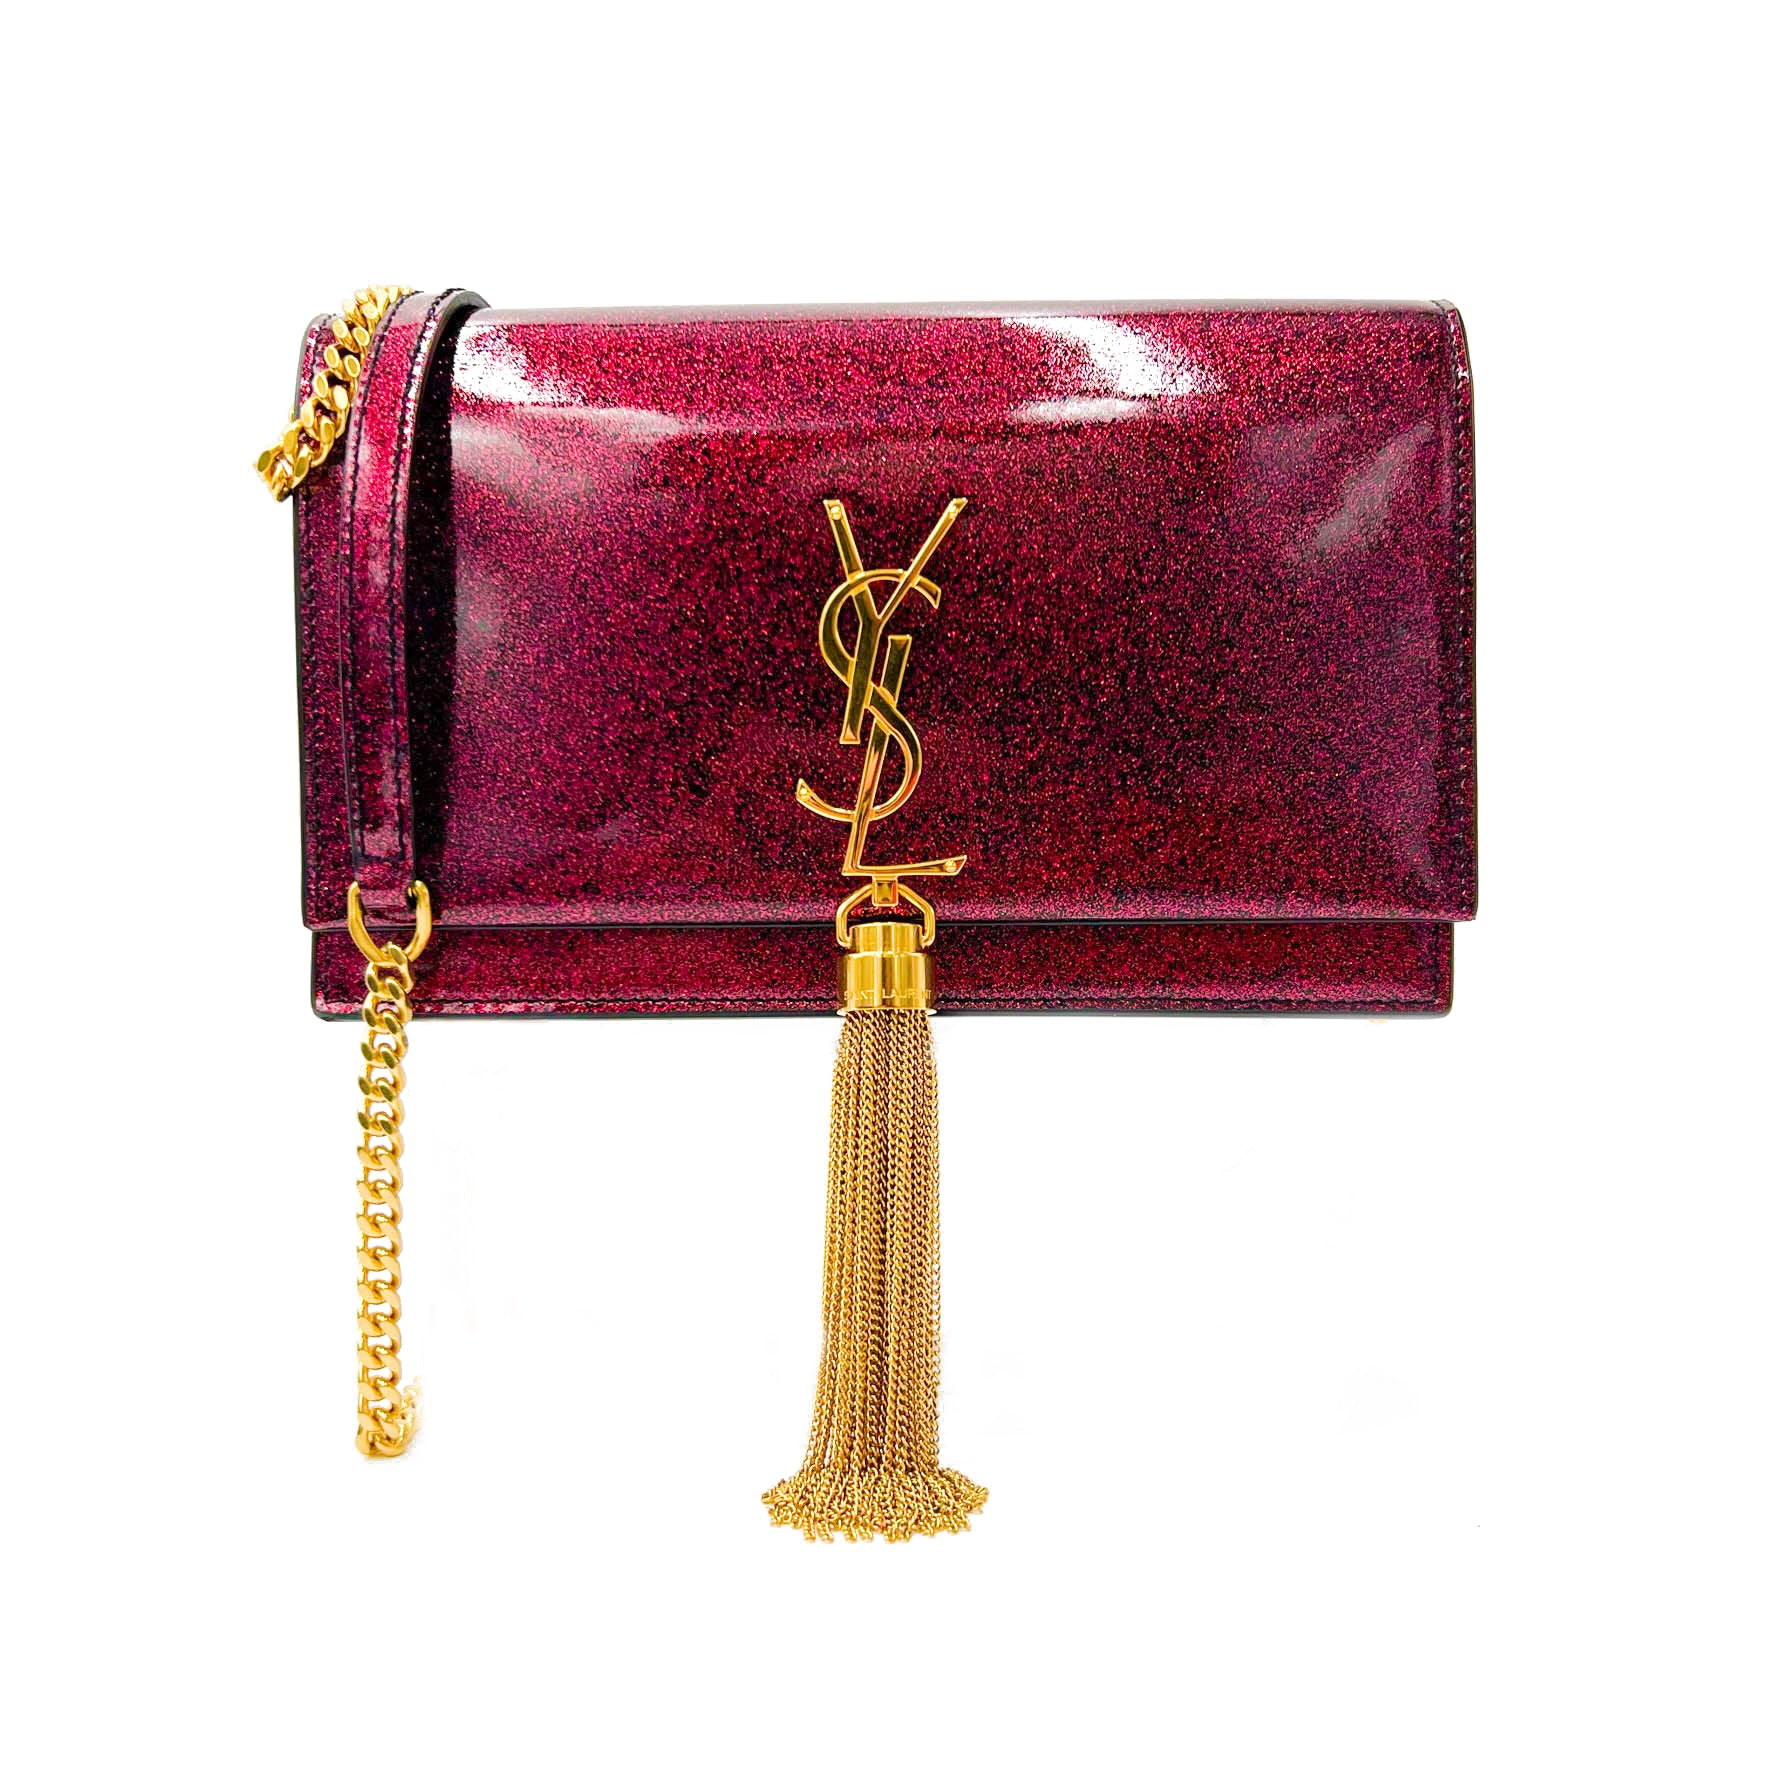 Card Holder on Chain Triomphe in Shiny Calfskin Velvet Red, Red, One Size